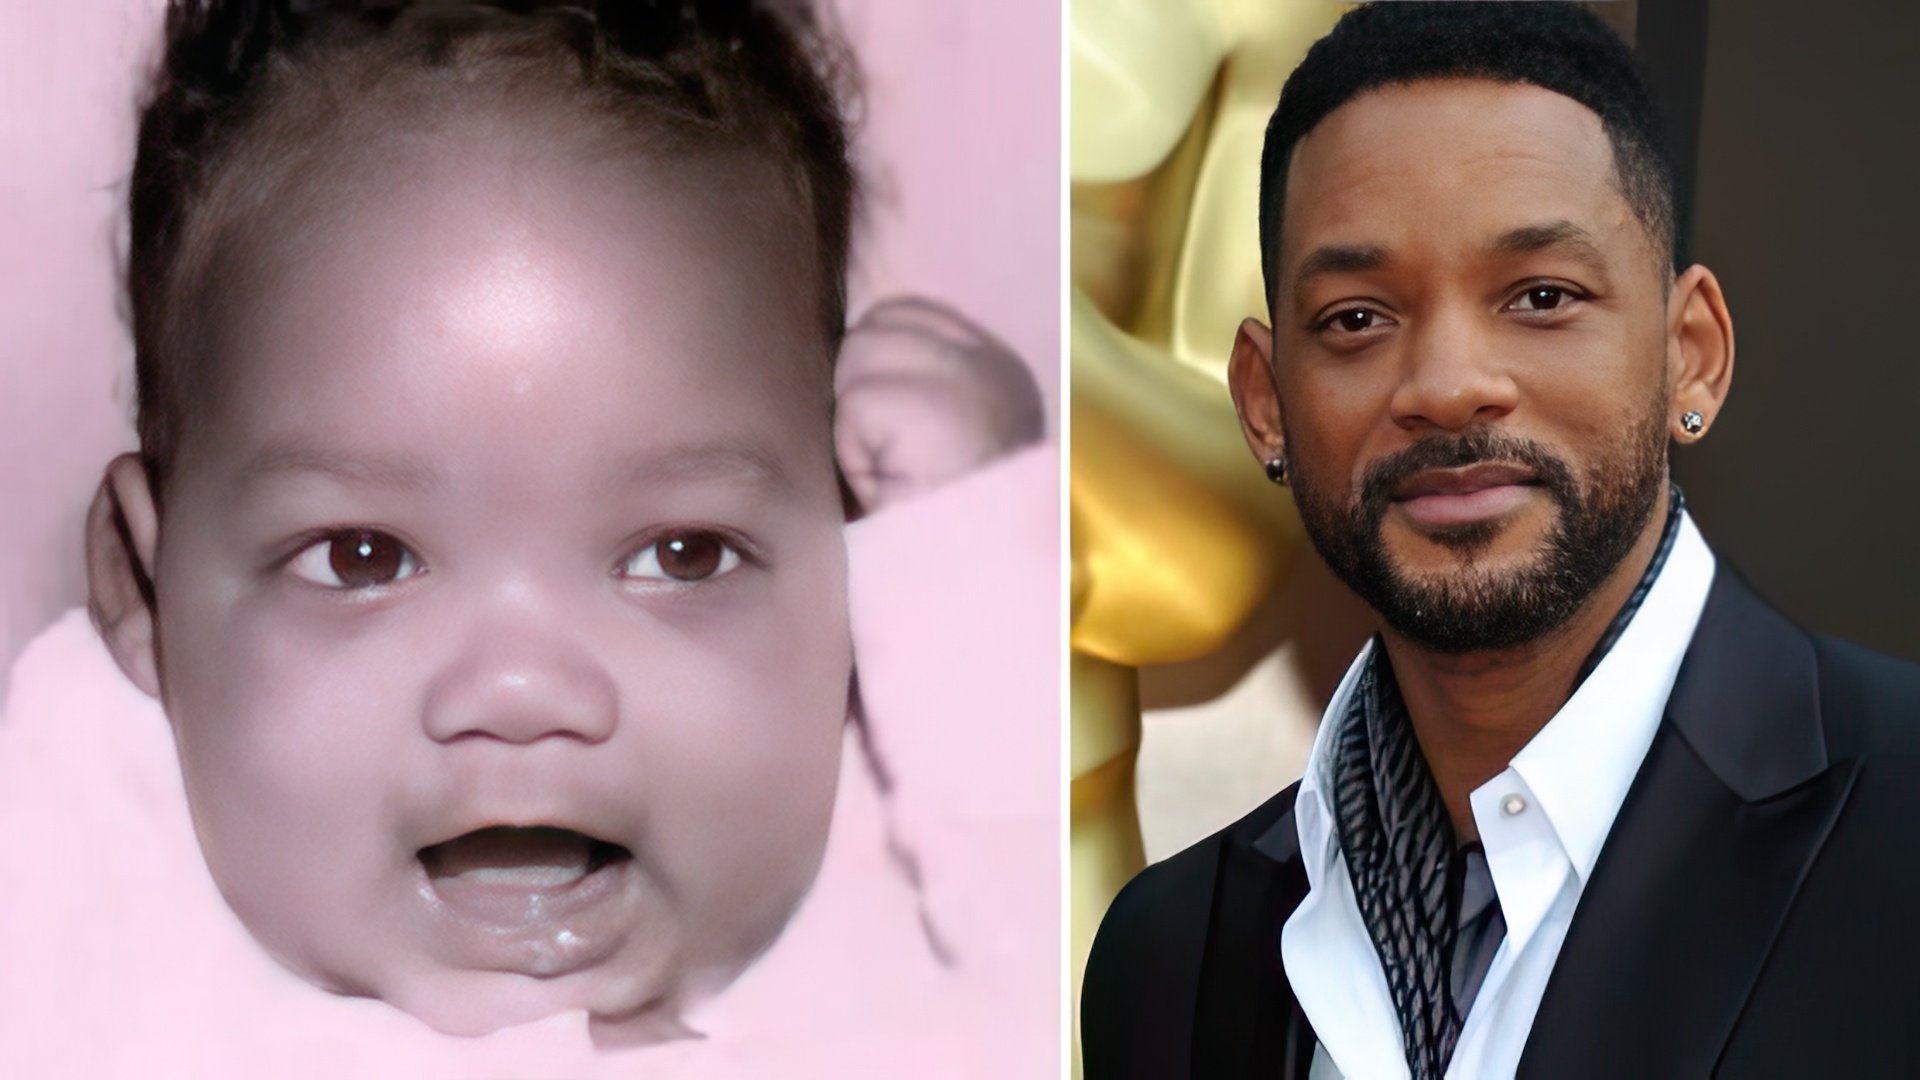 Little Will Smith